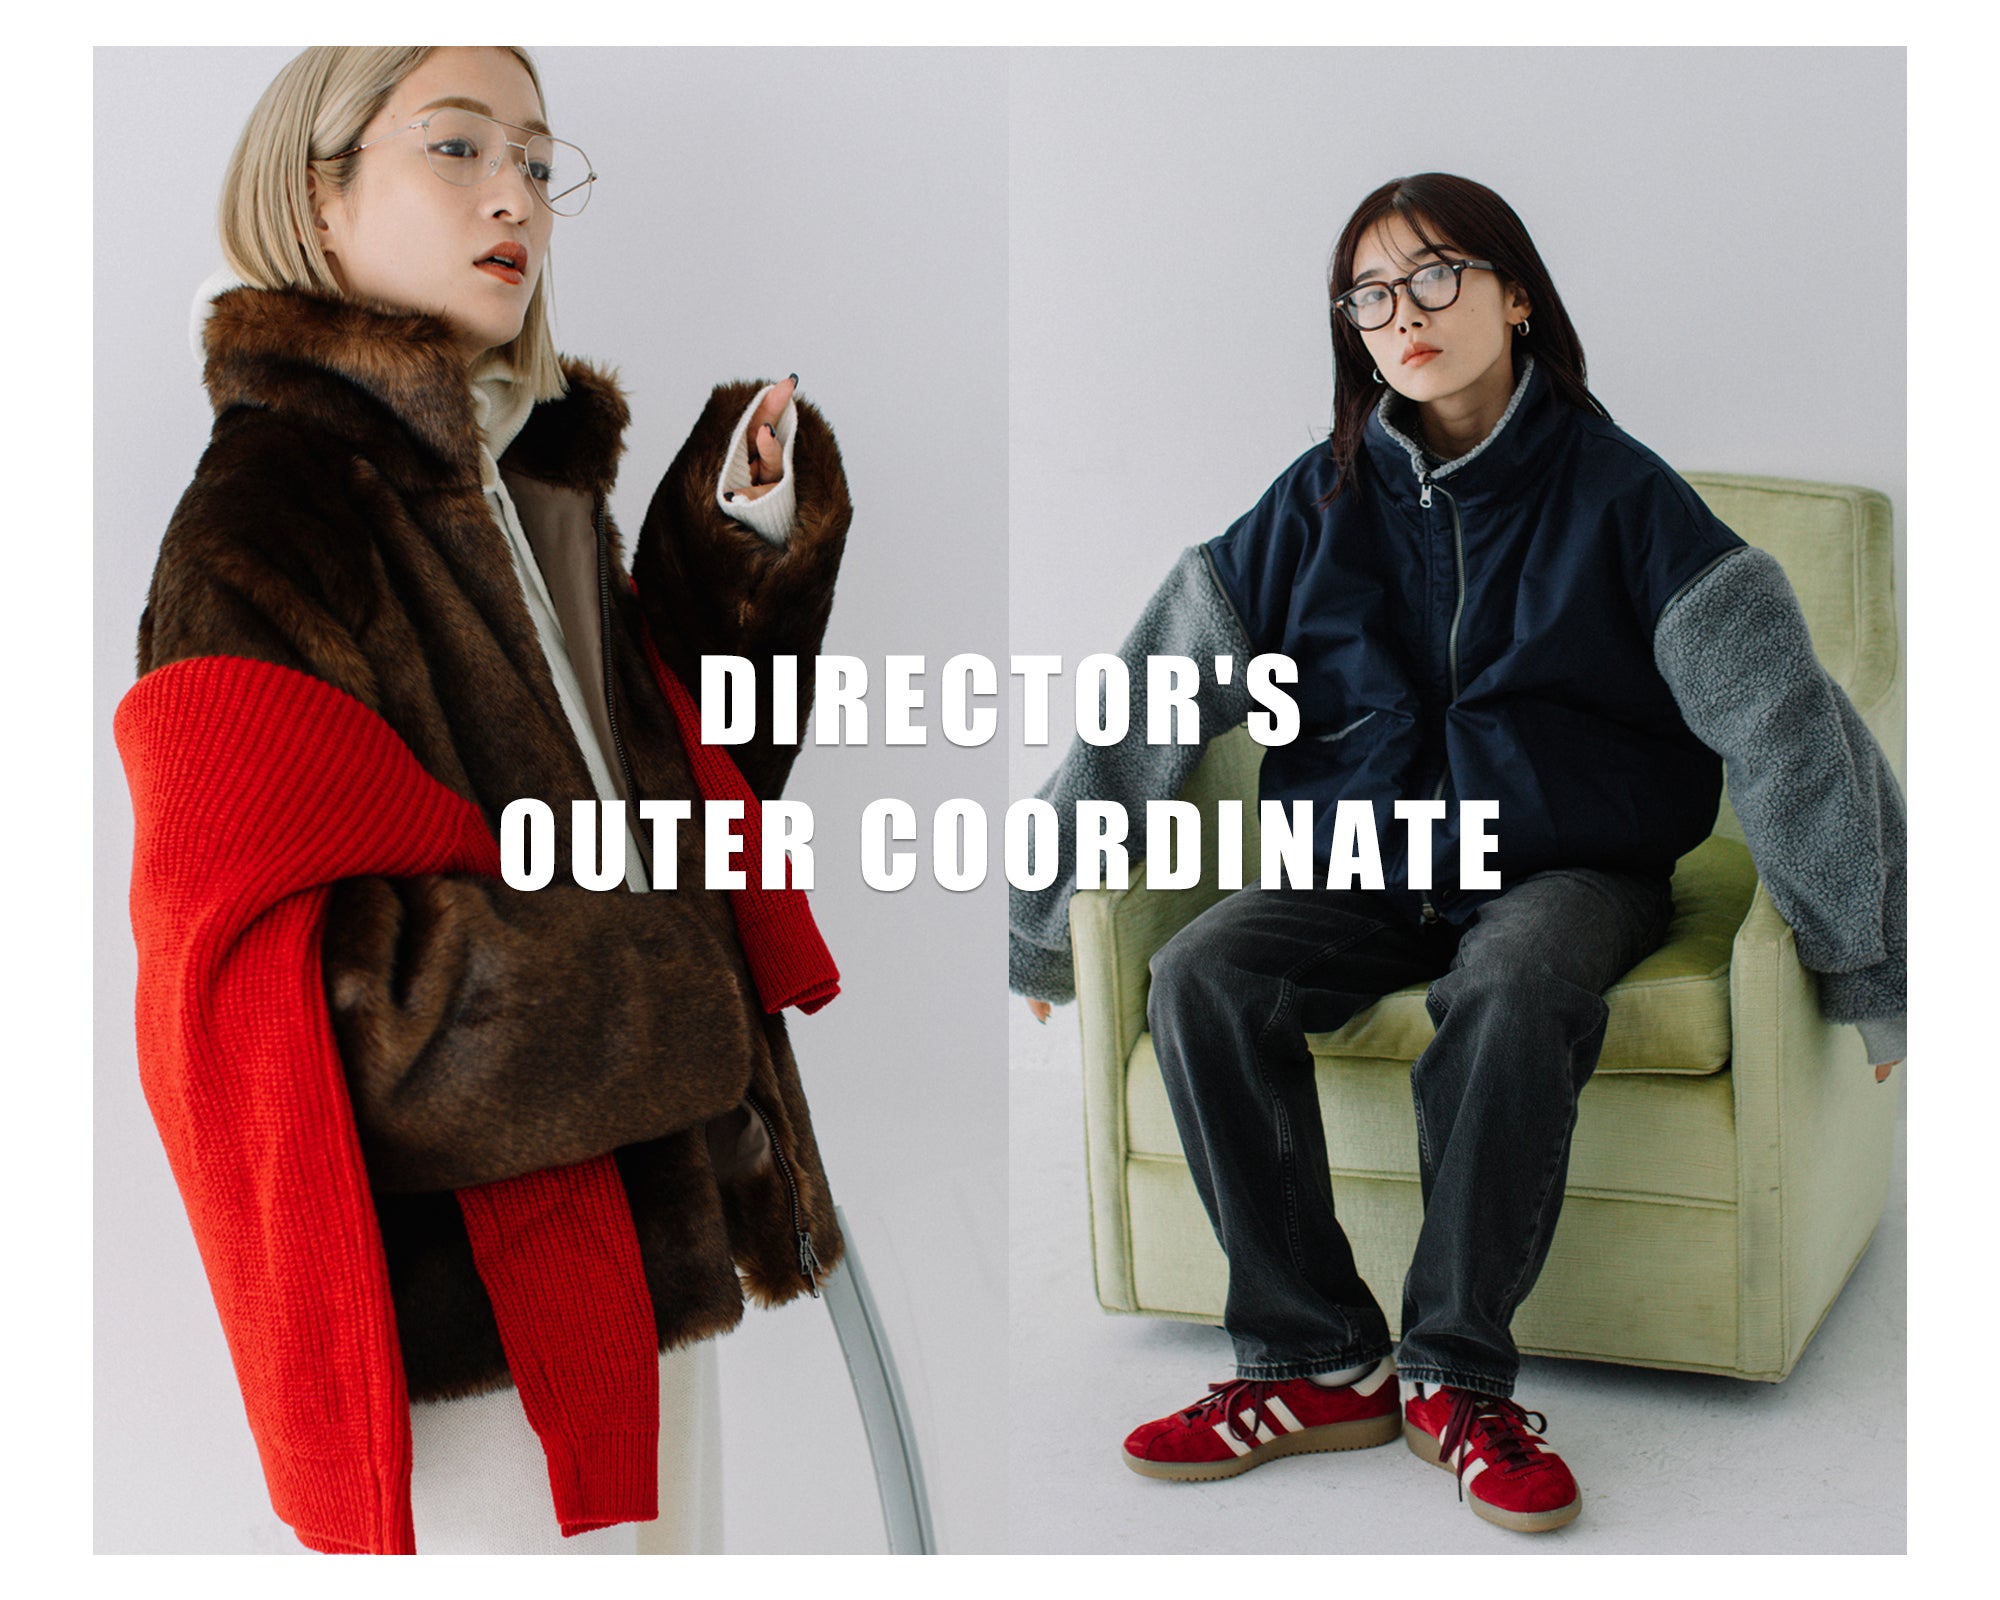 DIRECTOR'S OUTER COORDINATE